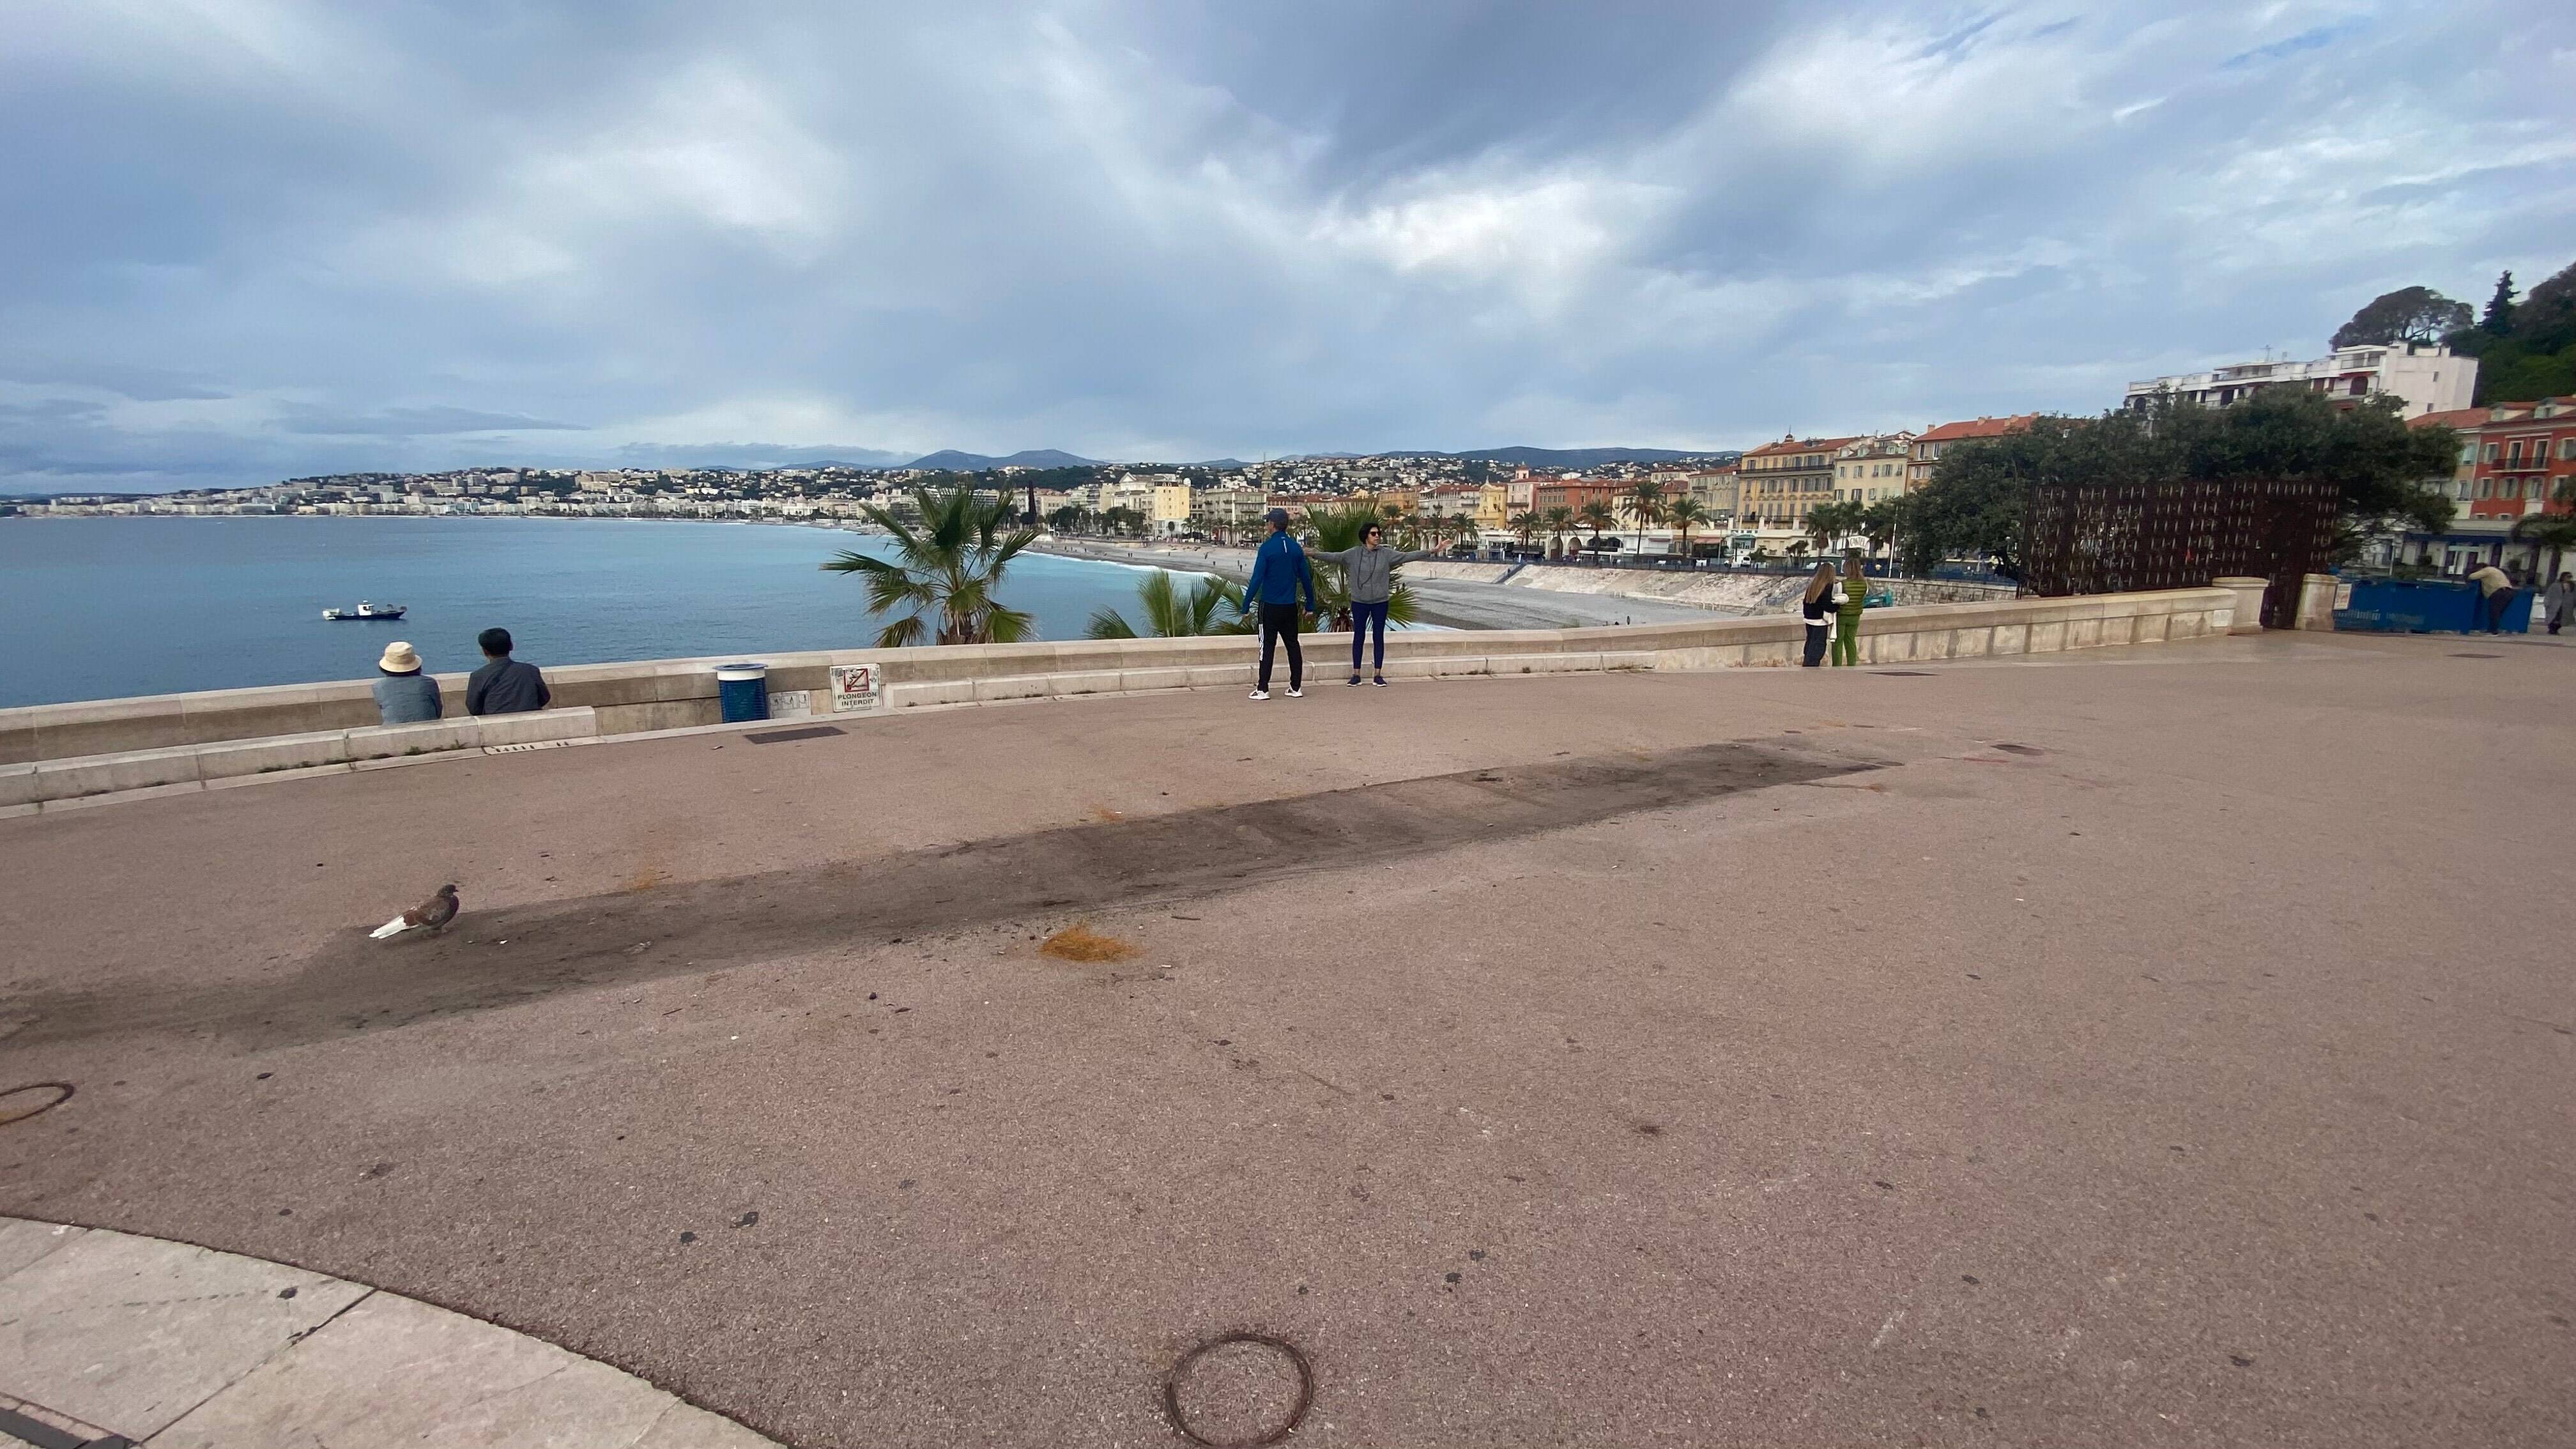 The Disappearance of the #I Love Nice Sculpture in Nice: A Mystery Unraveled